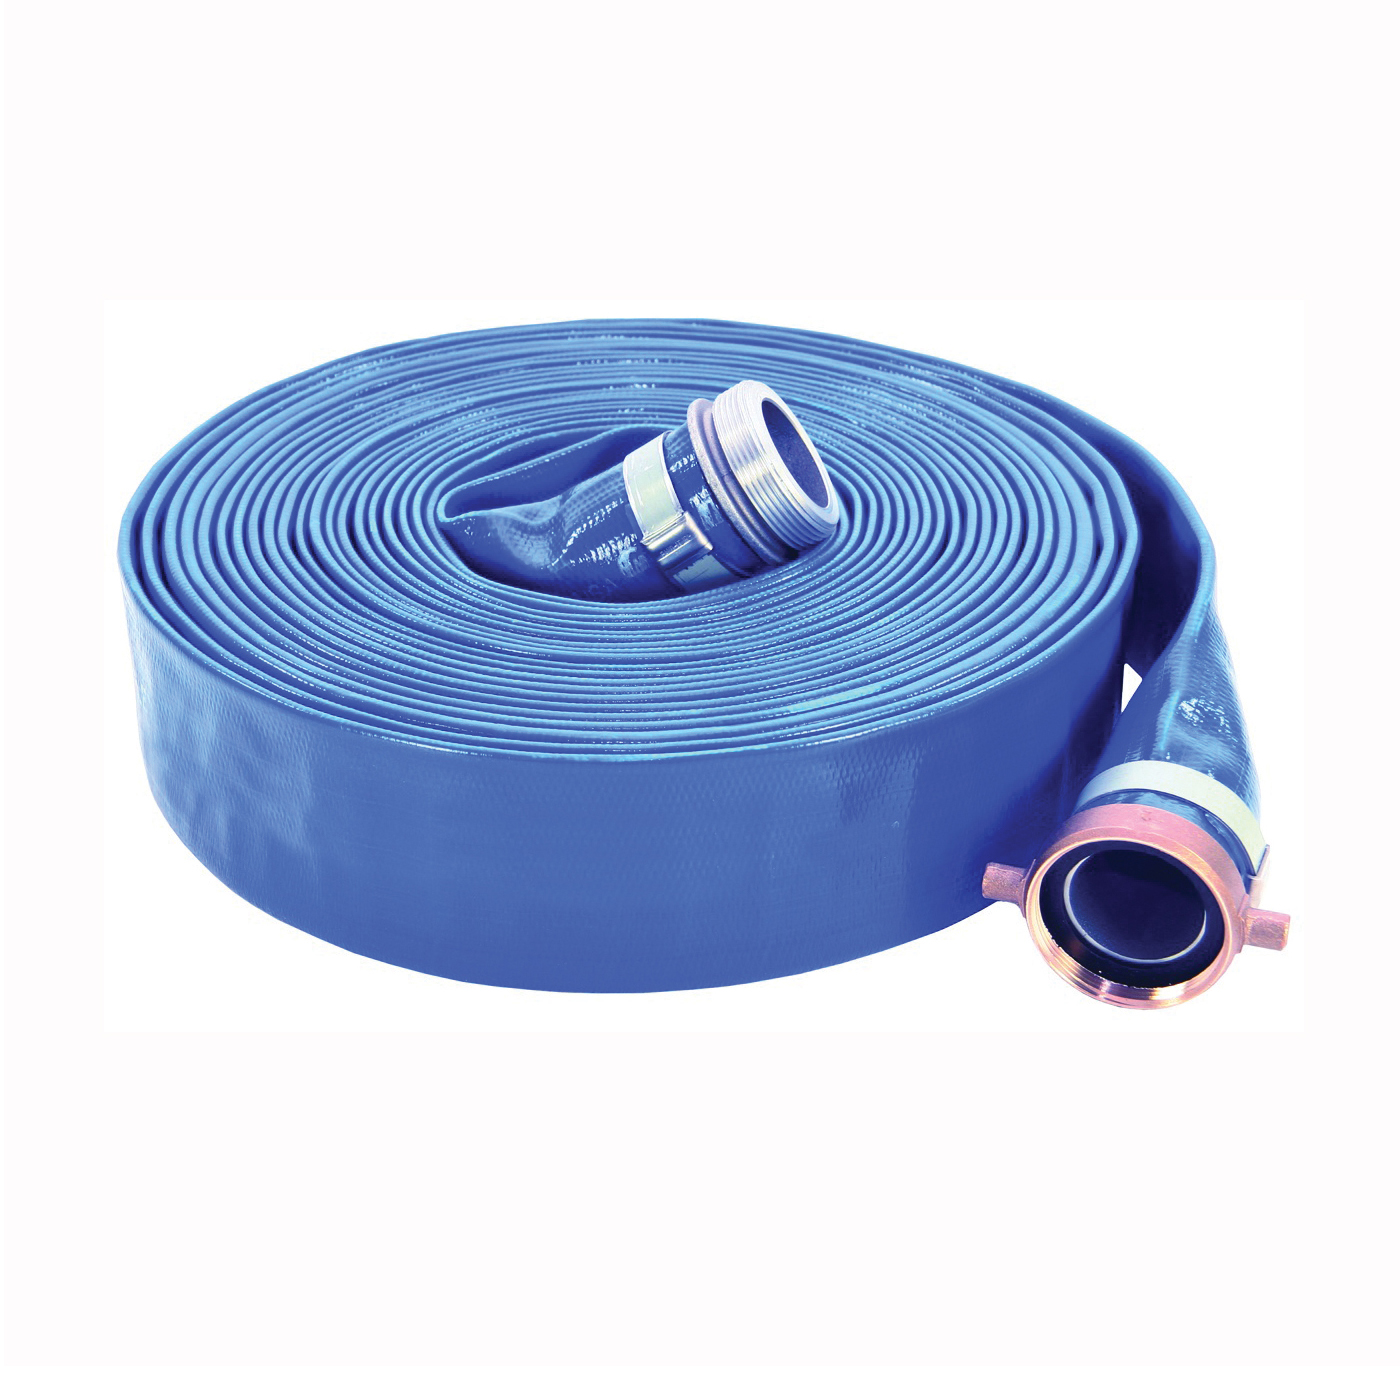 1147-3000-50-CE Pump Discharge Hose Assembly, 3 in ID, 50 ft L, Male x Female Coupling, PVC, Blue